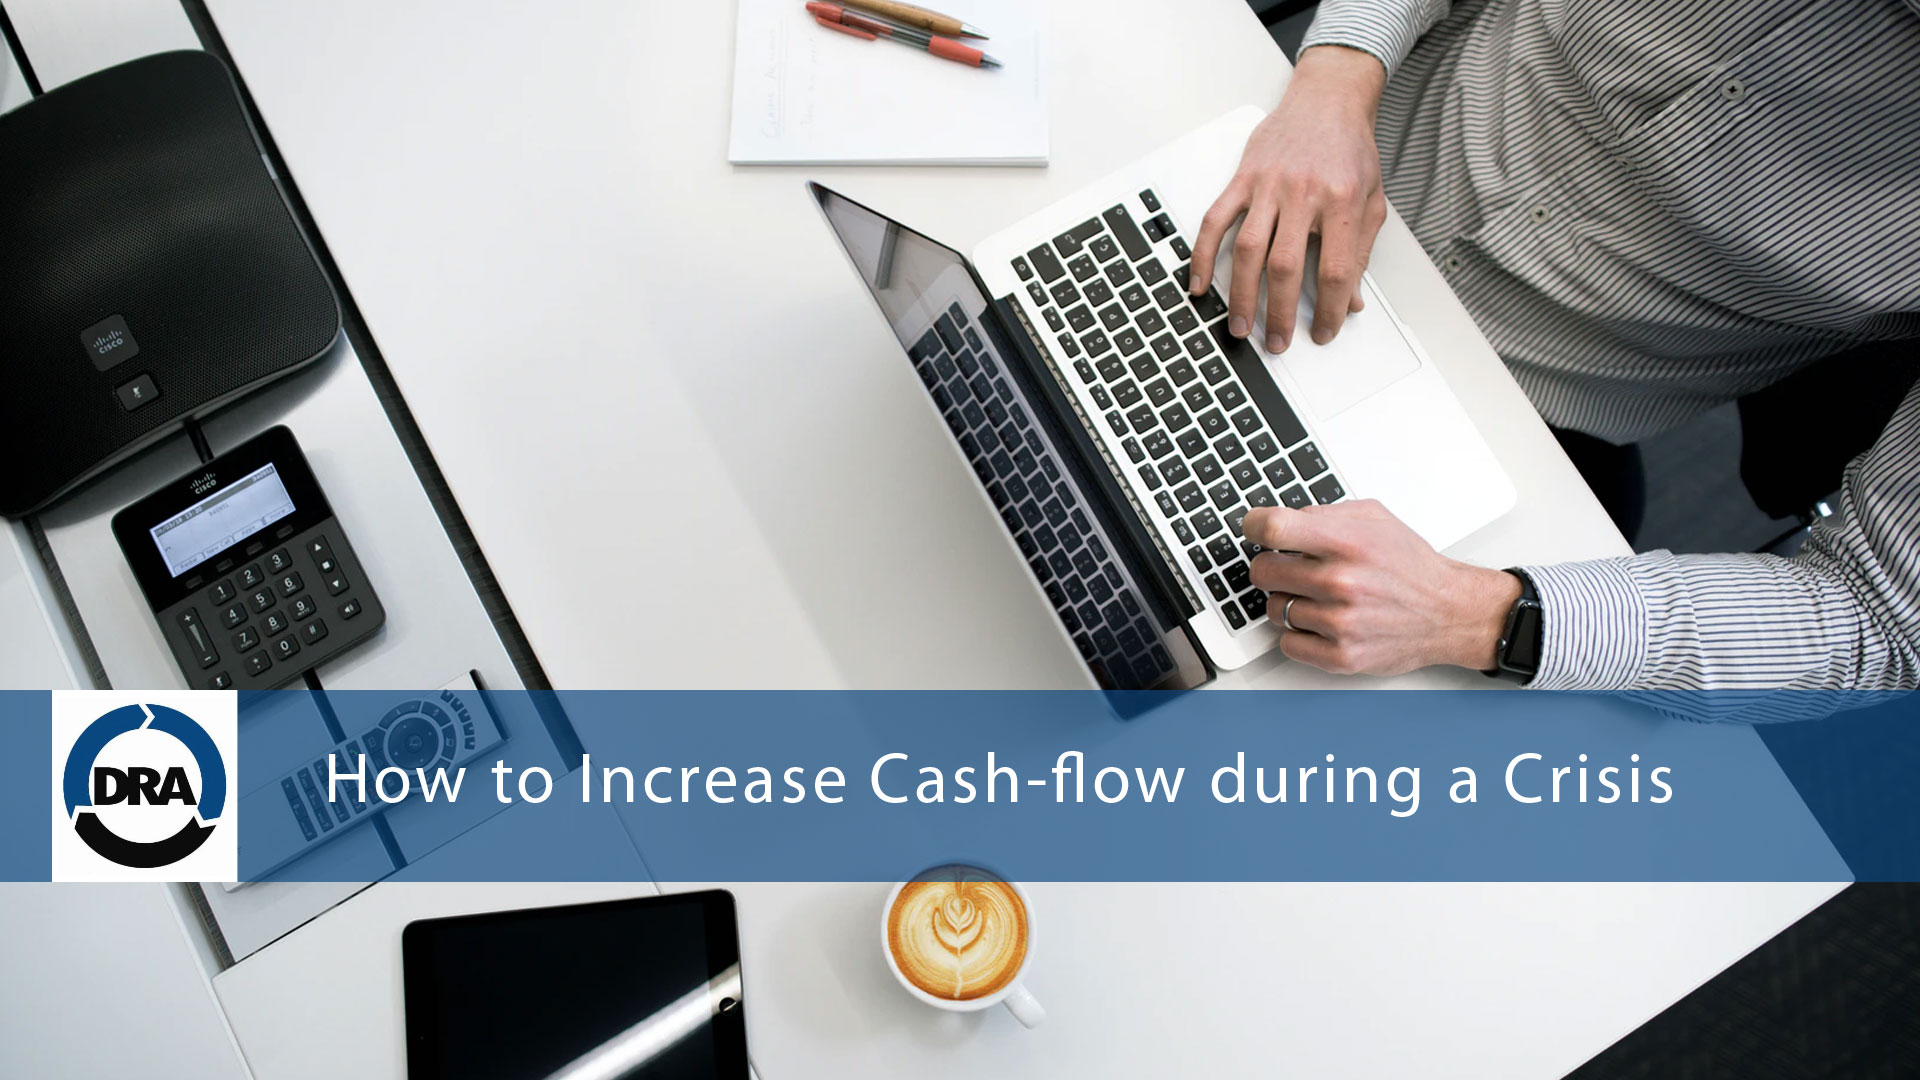 How to Increase Cash-flow during a Crisis